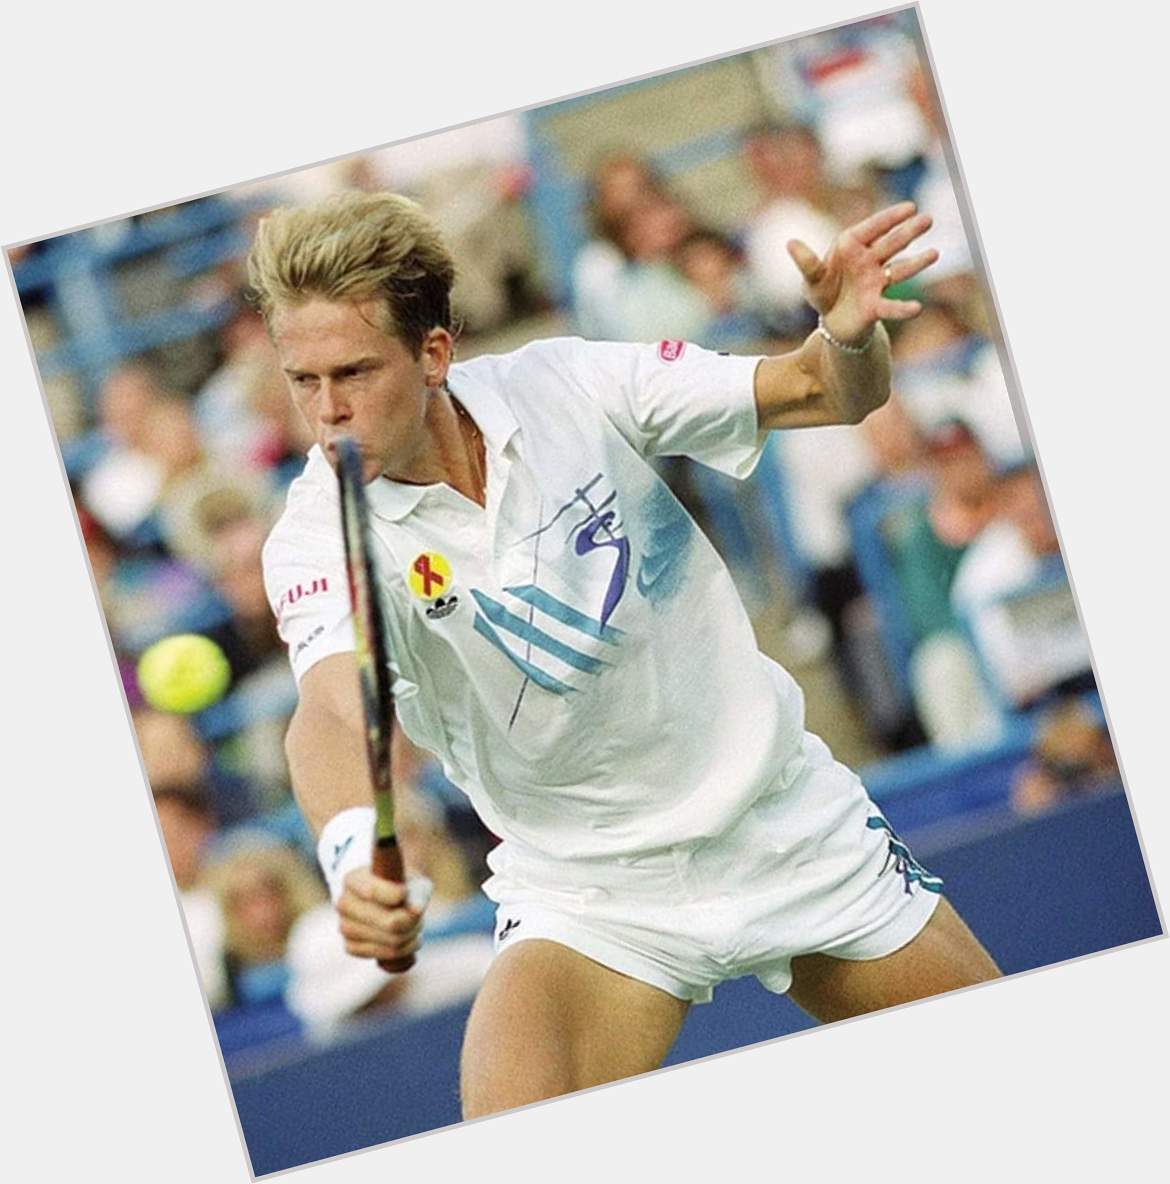 Happy birthday to one of my all-time favourite tennis players....the maestro of serve and volley Stefan Edberg. 